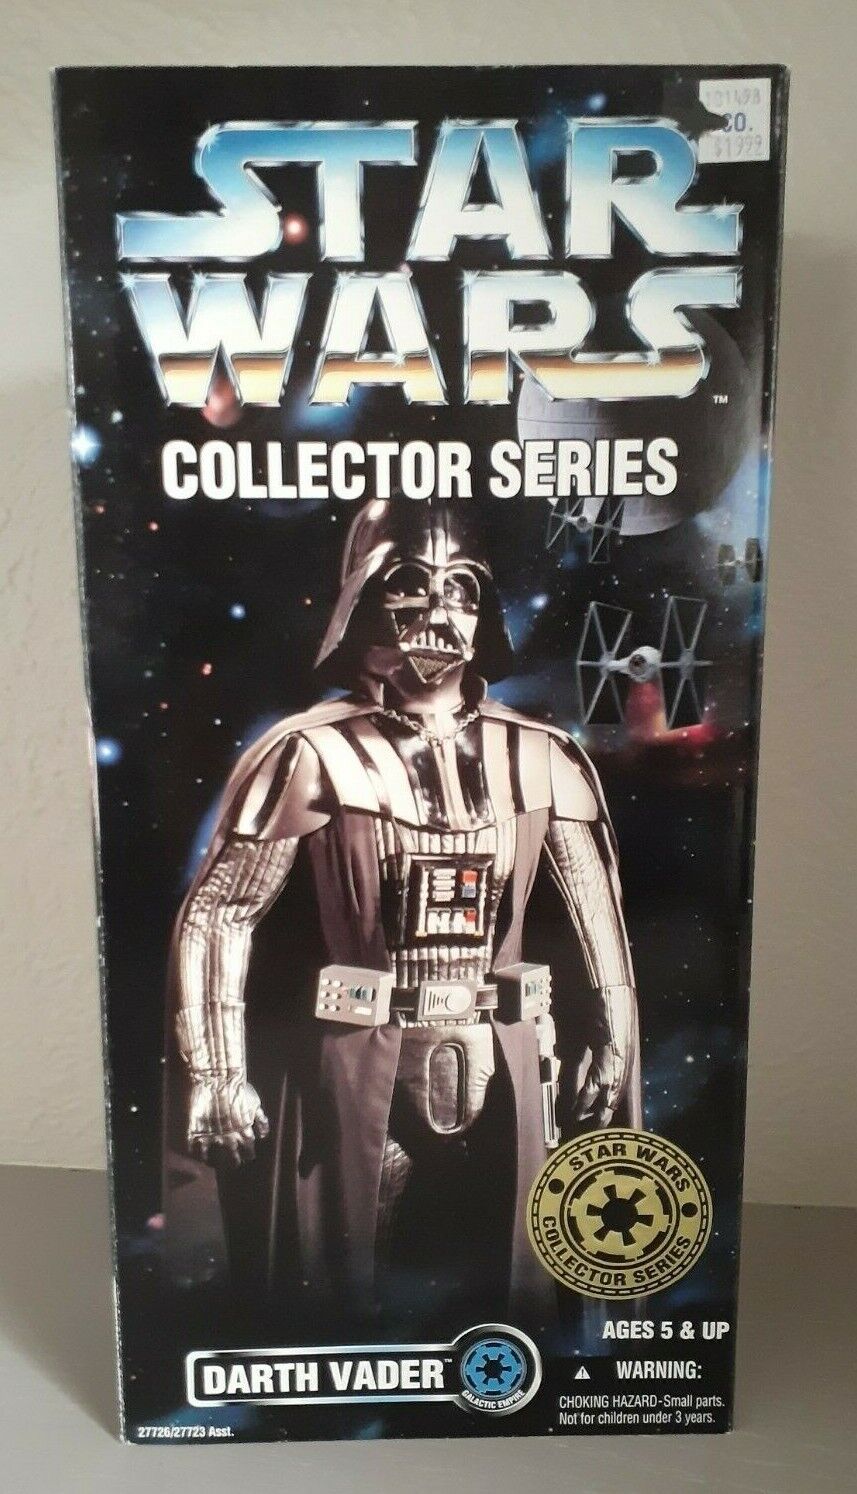 1997 Kenner Star Wars Collector Series 12 Inch Darth Vader Action Figure New  Kenner